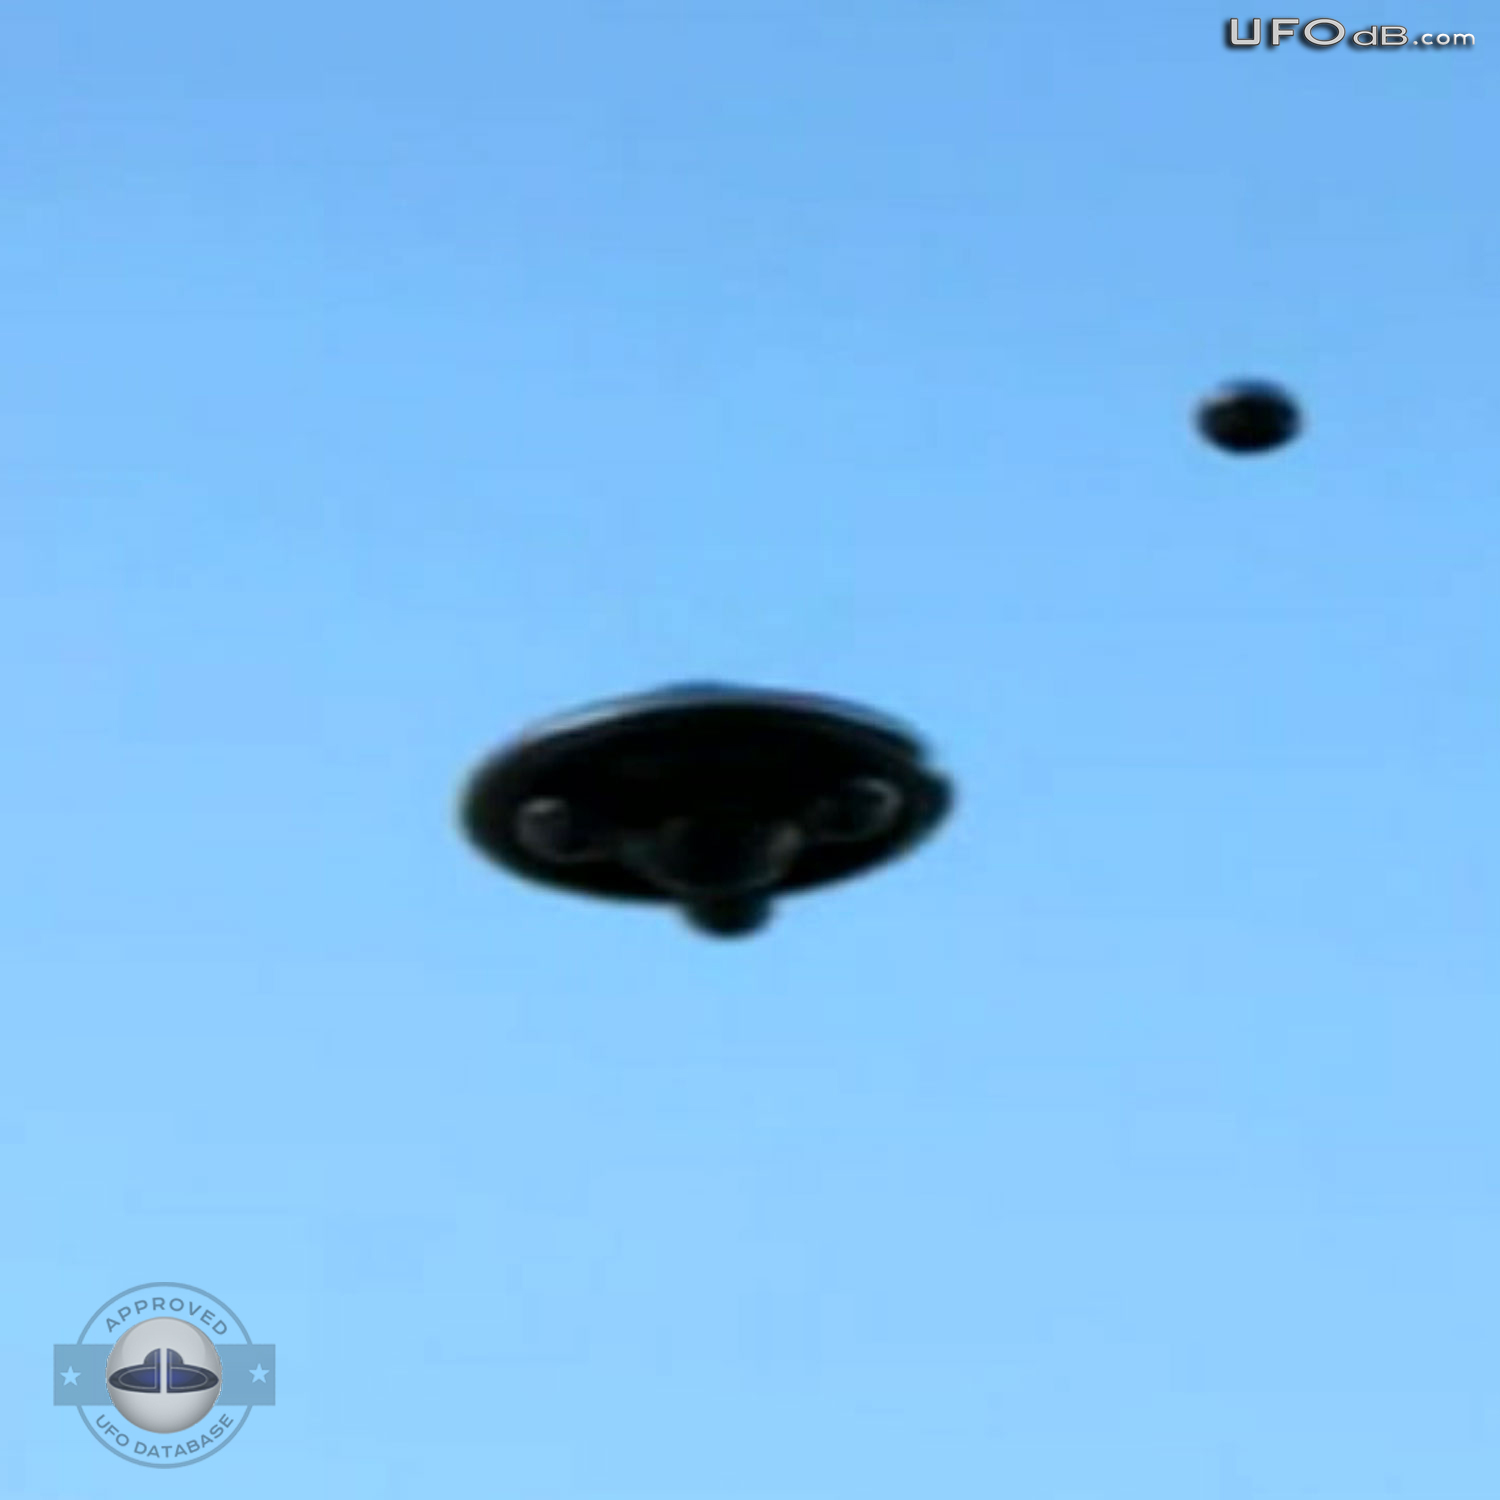 Italian UFO hunter captures on pictures a great 2011 UFO sighting UFO Picture #372-4